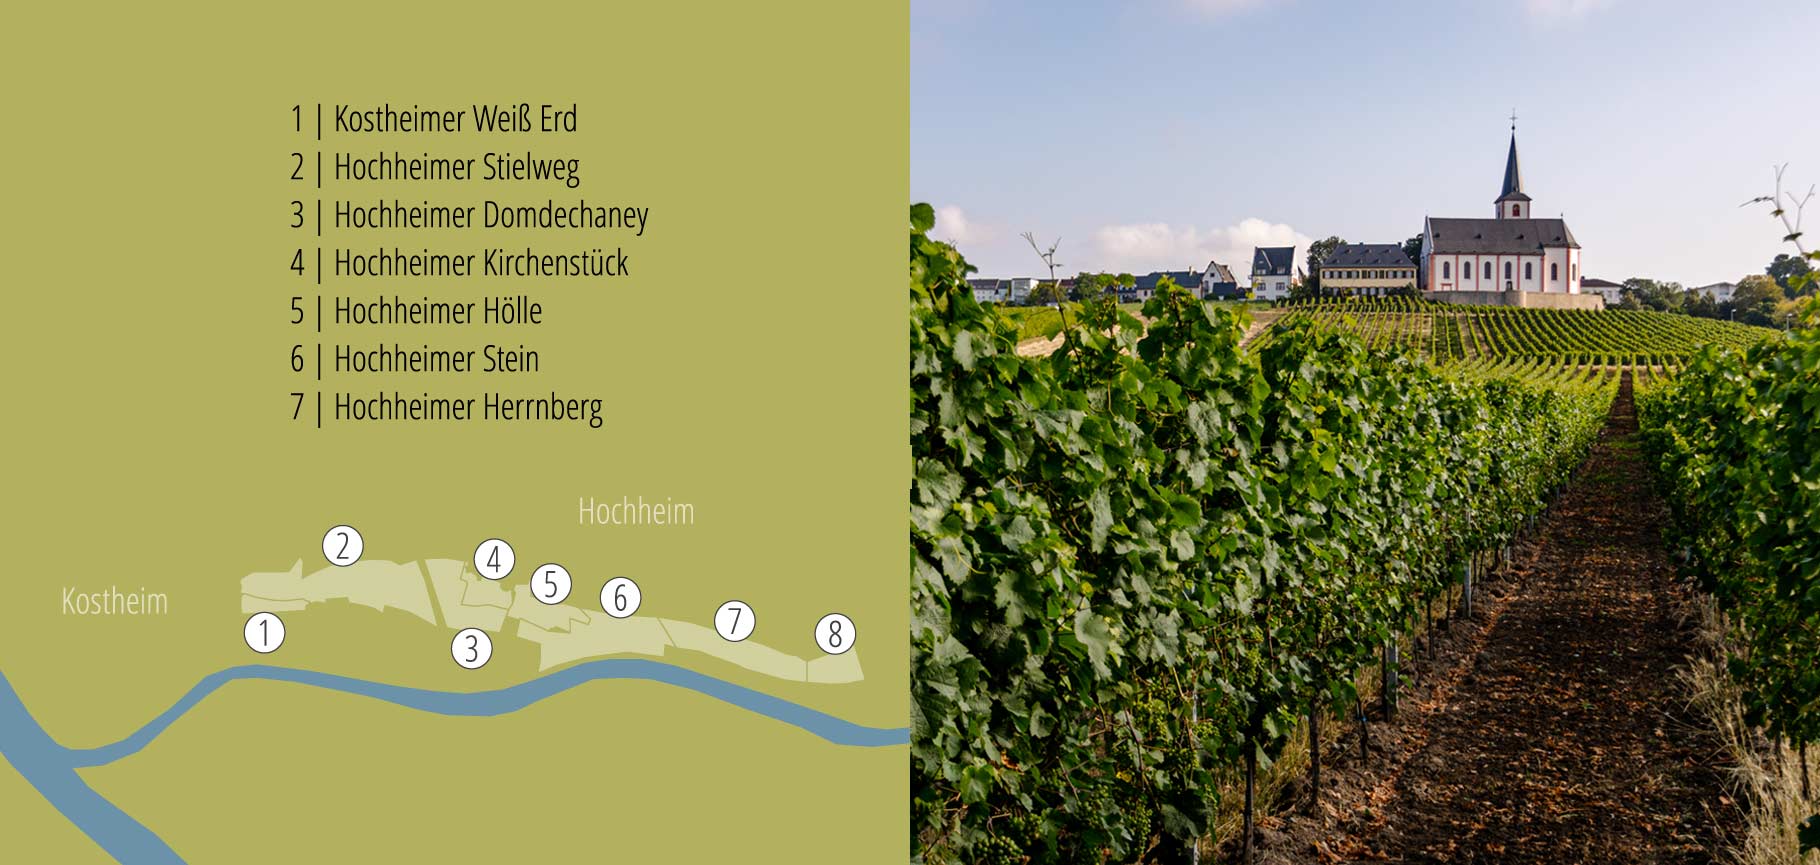 Illustration and photo of the vineyard sites in Hochheim and Kostheim